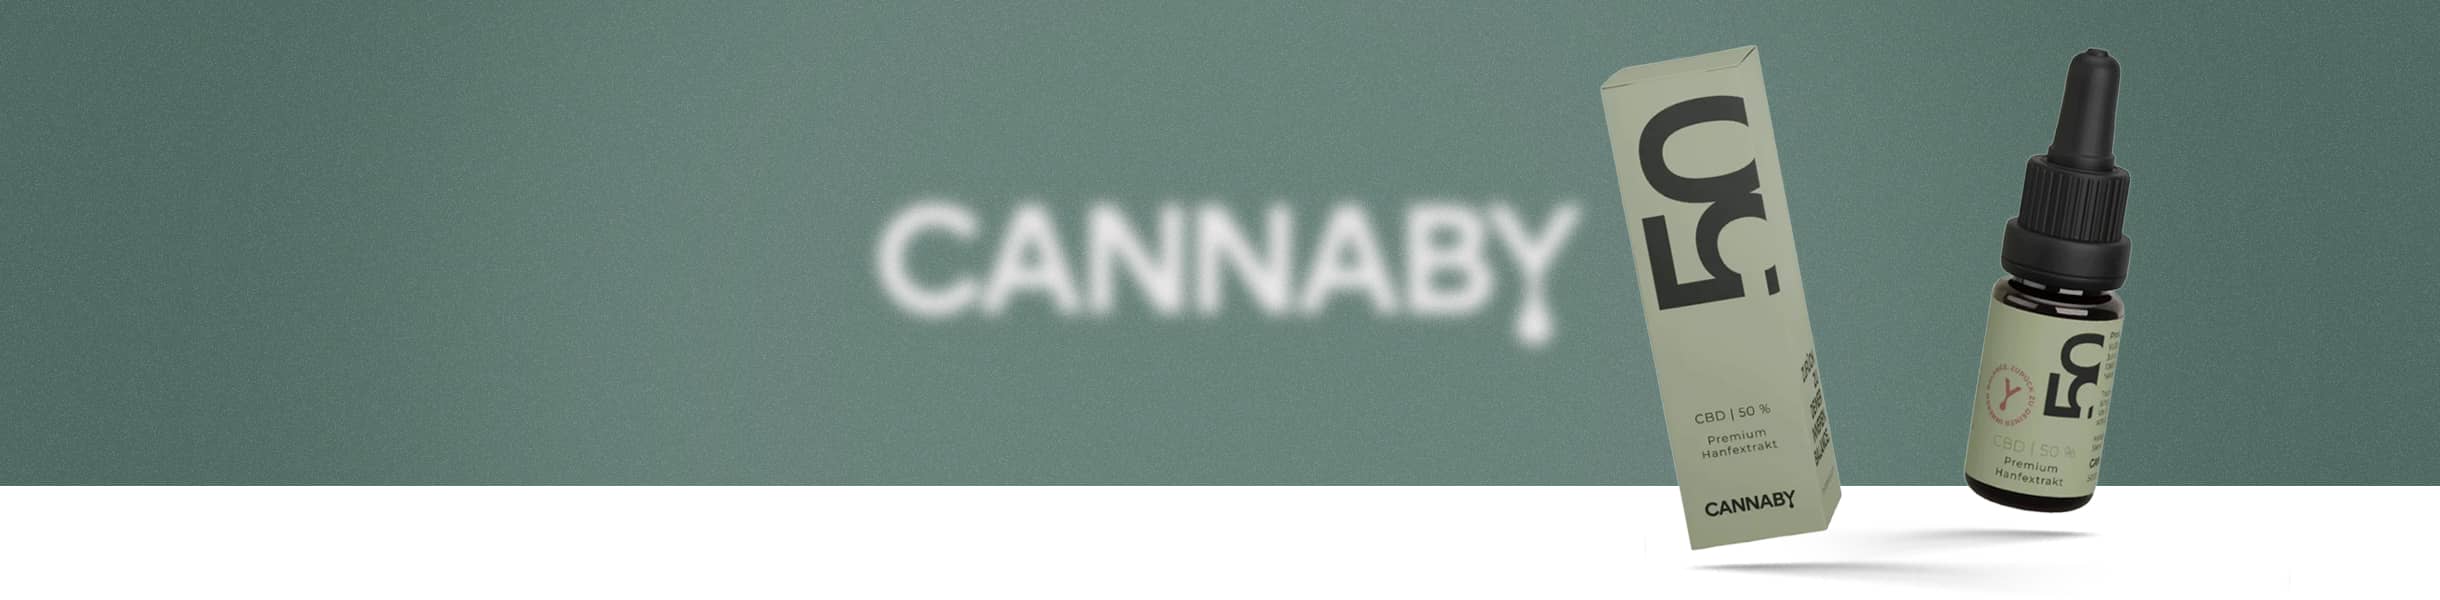 Cannaby Online Shop